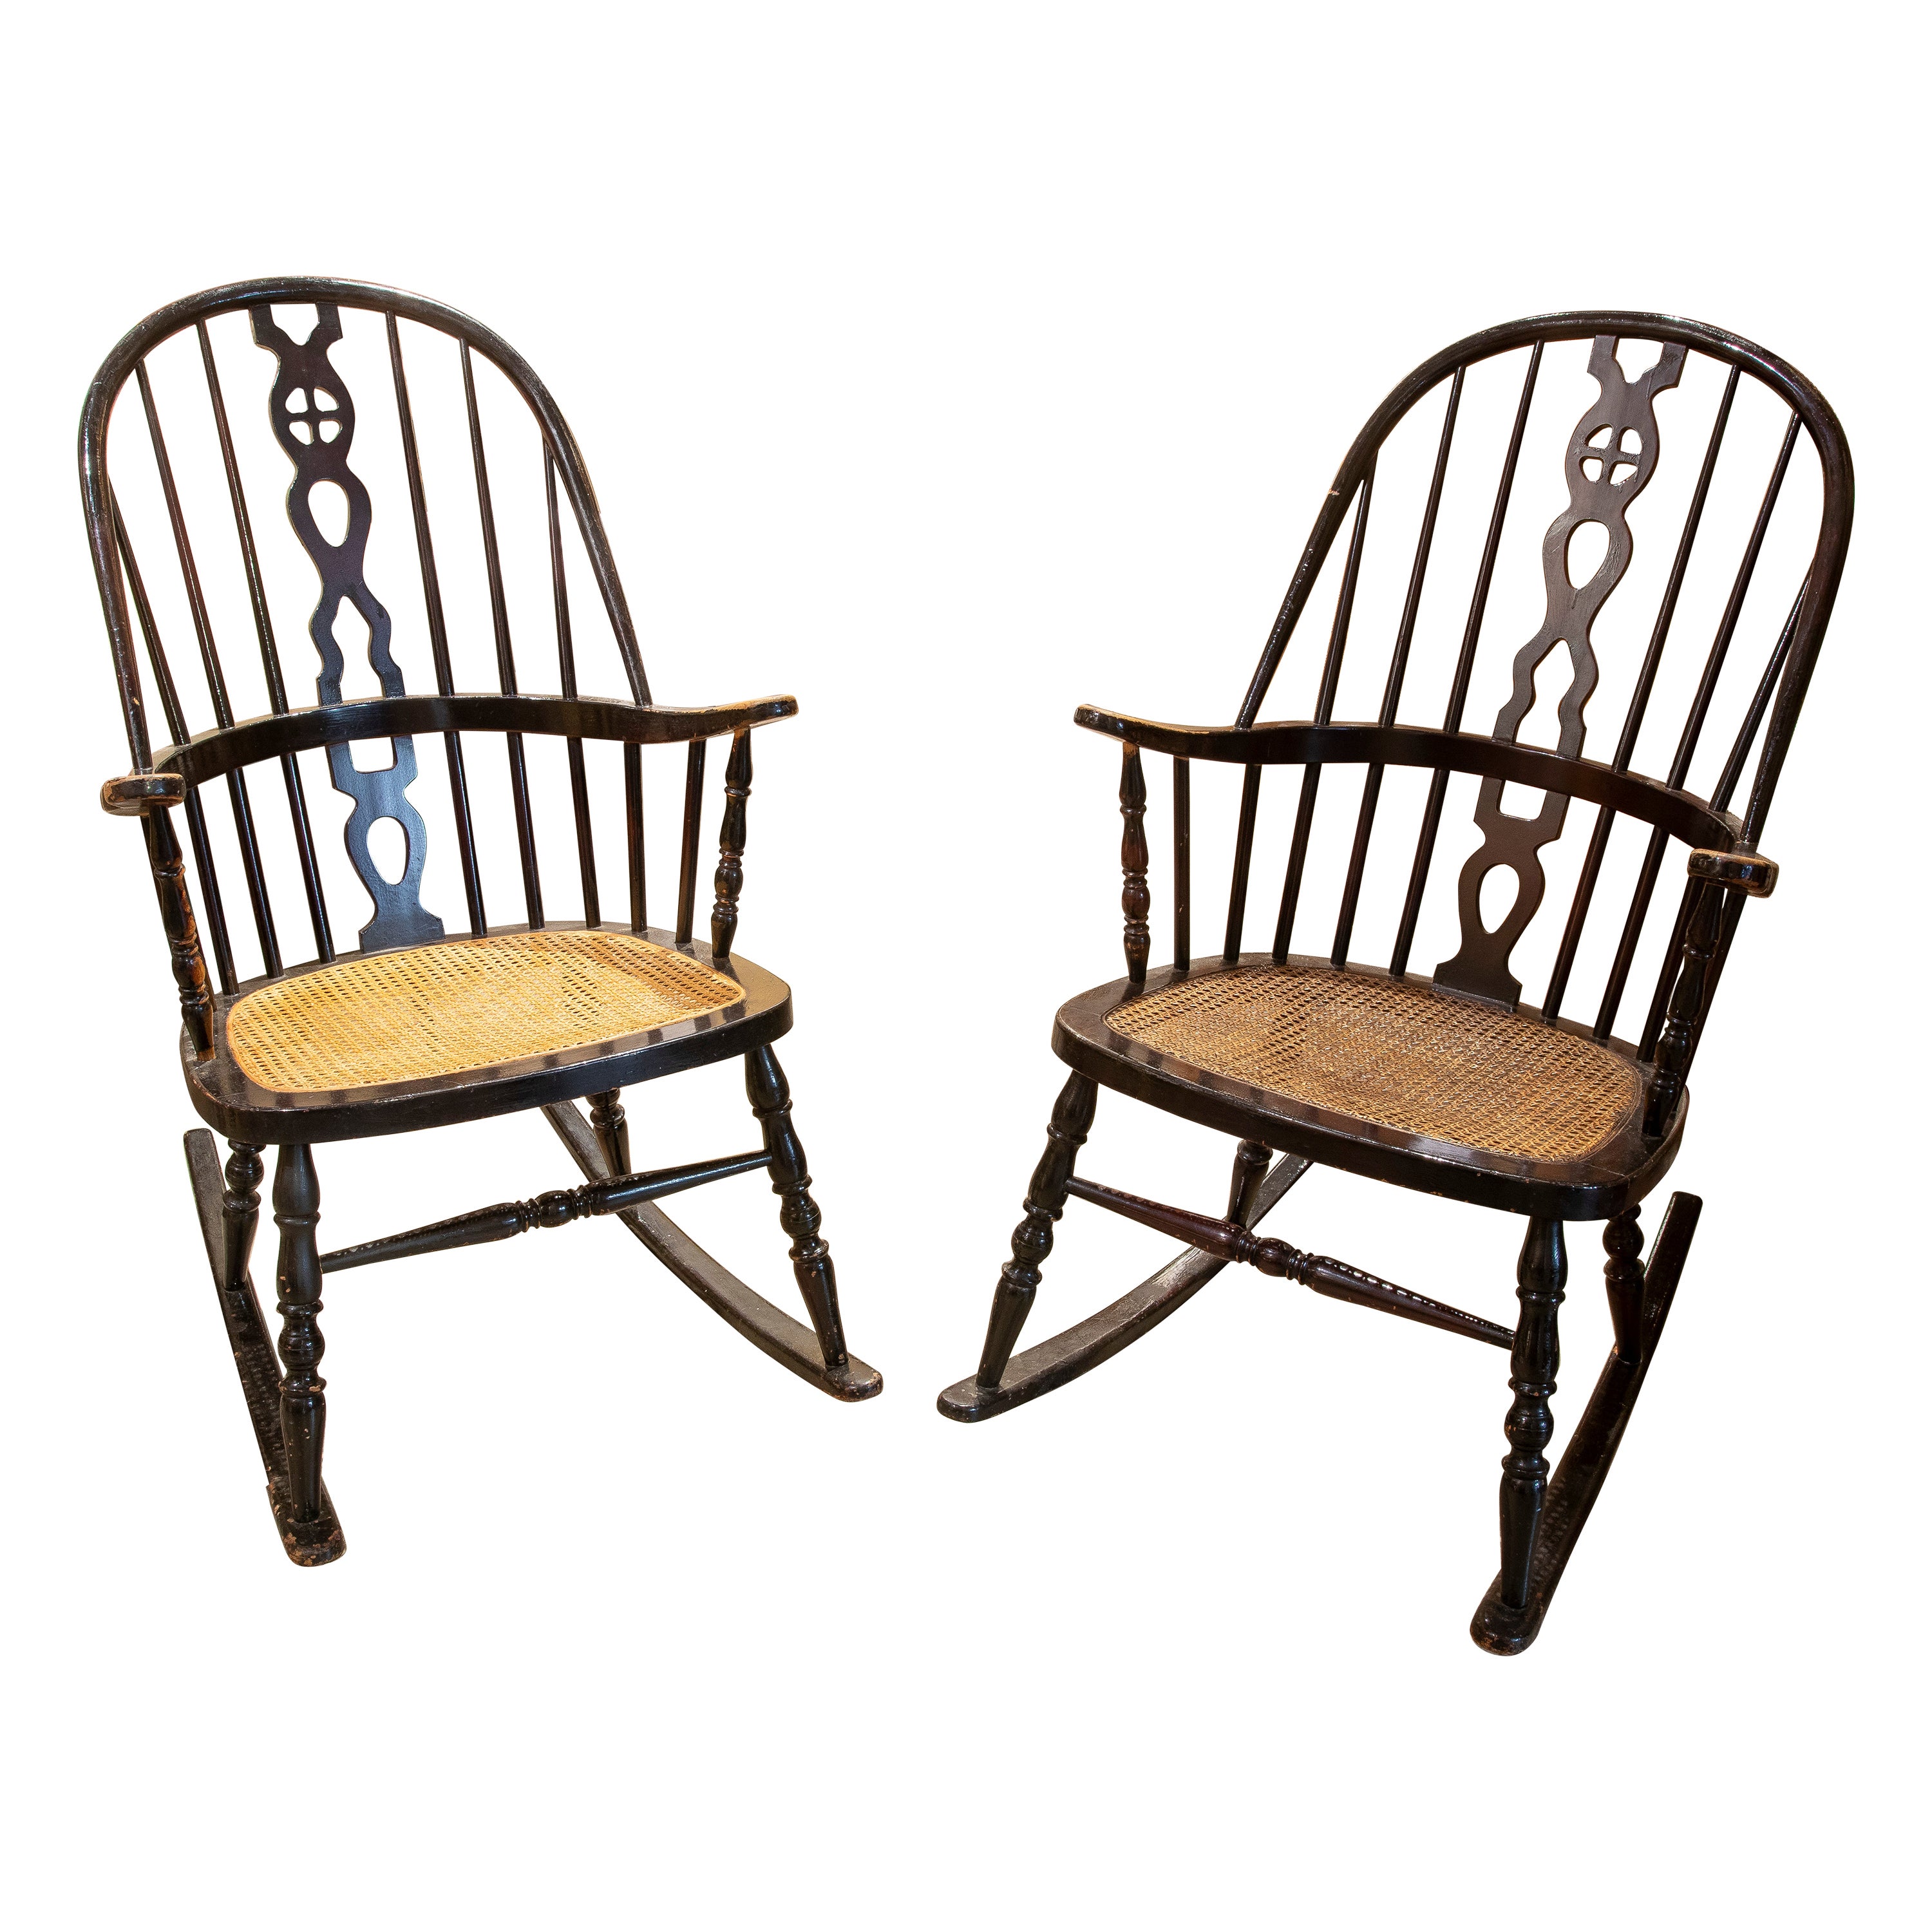 Pair of Wooden Rocking Chairs with Raffia Seat For Sale